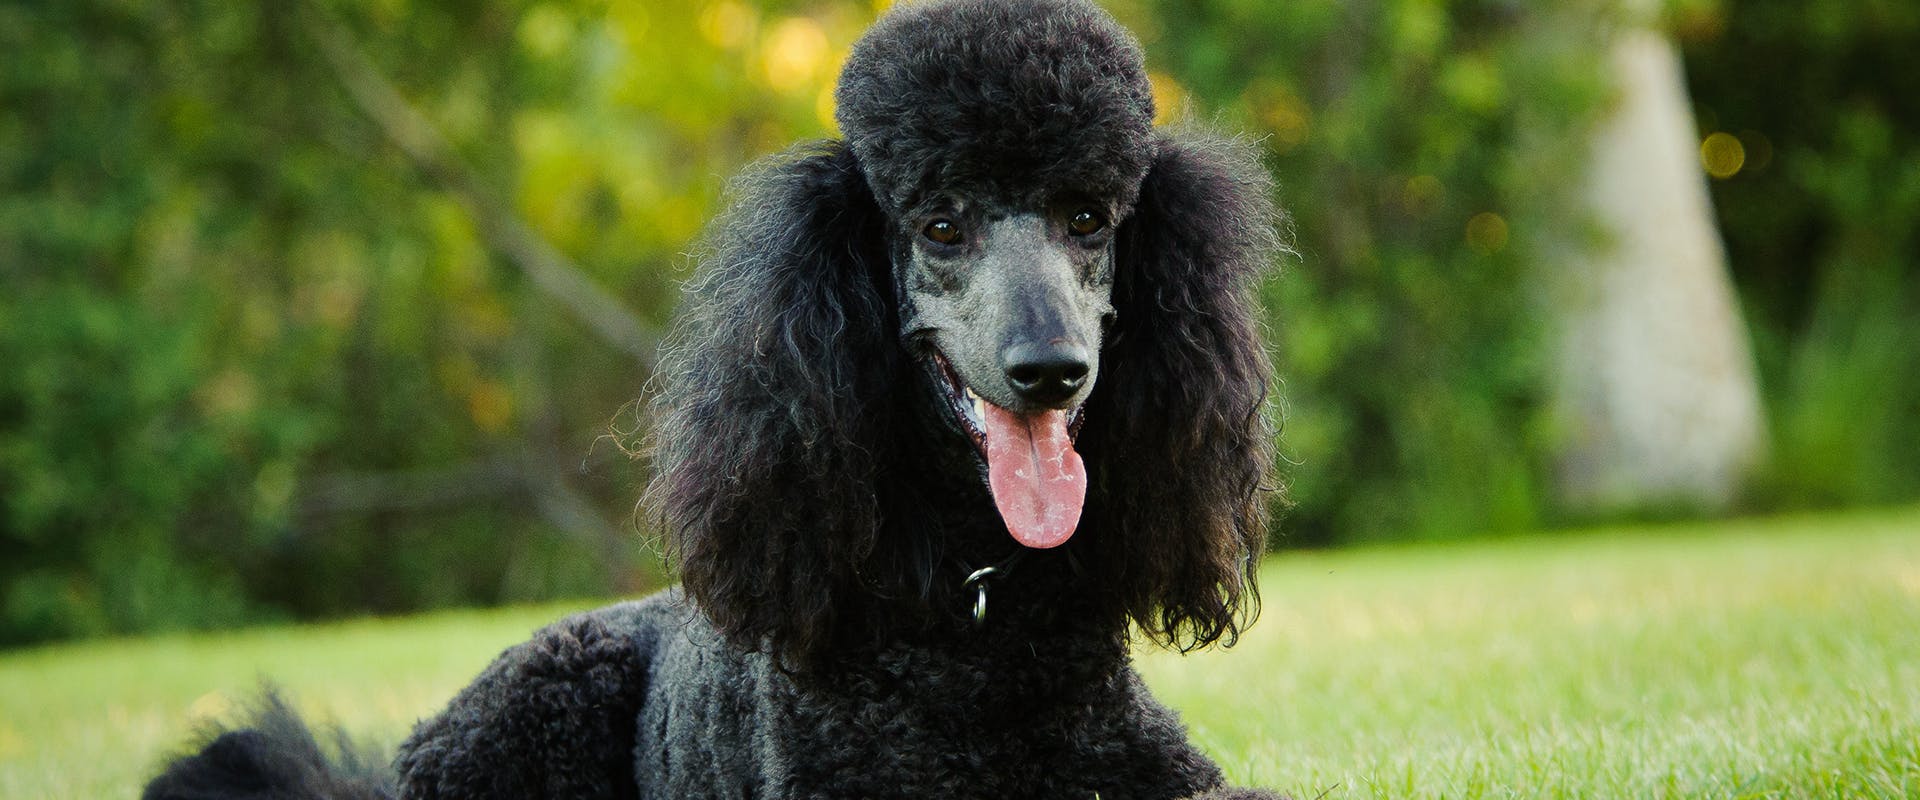 A black Poodle dog sitting in grass